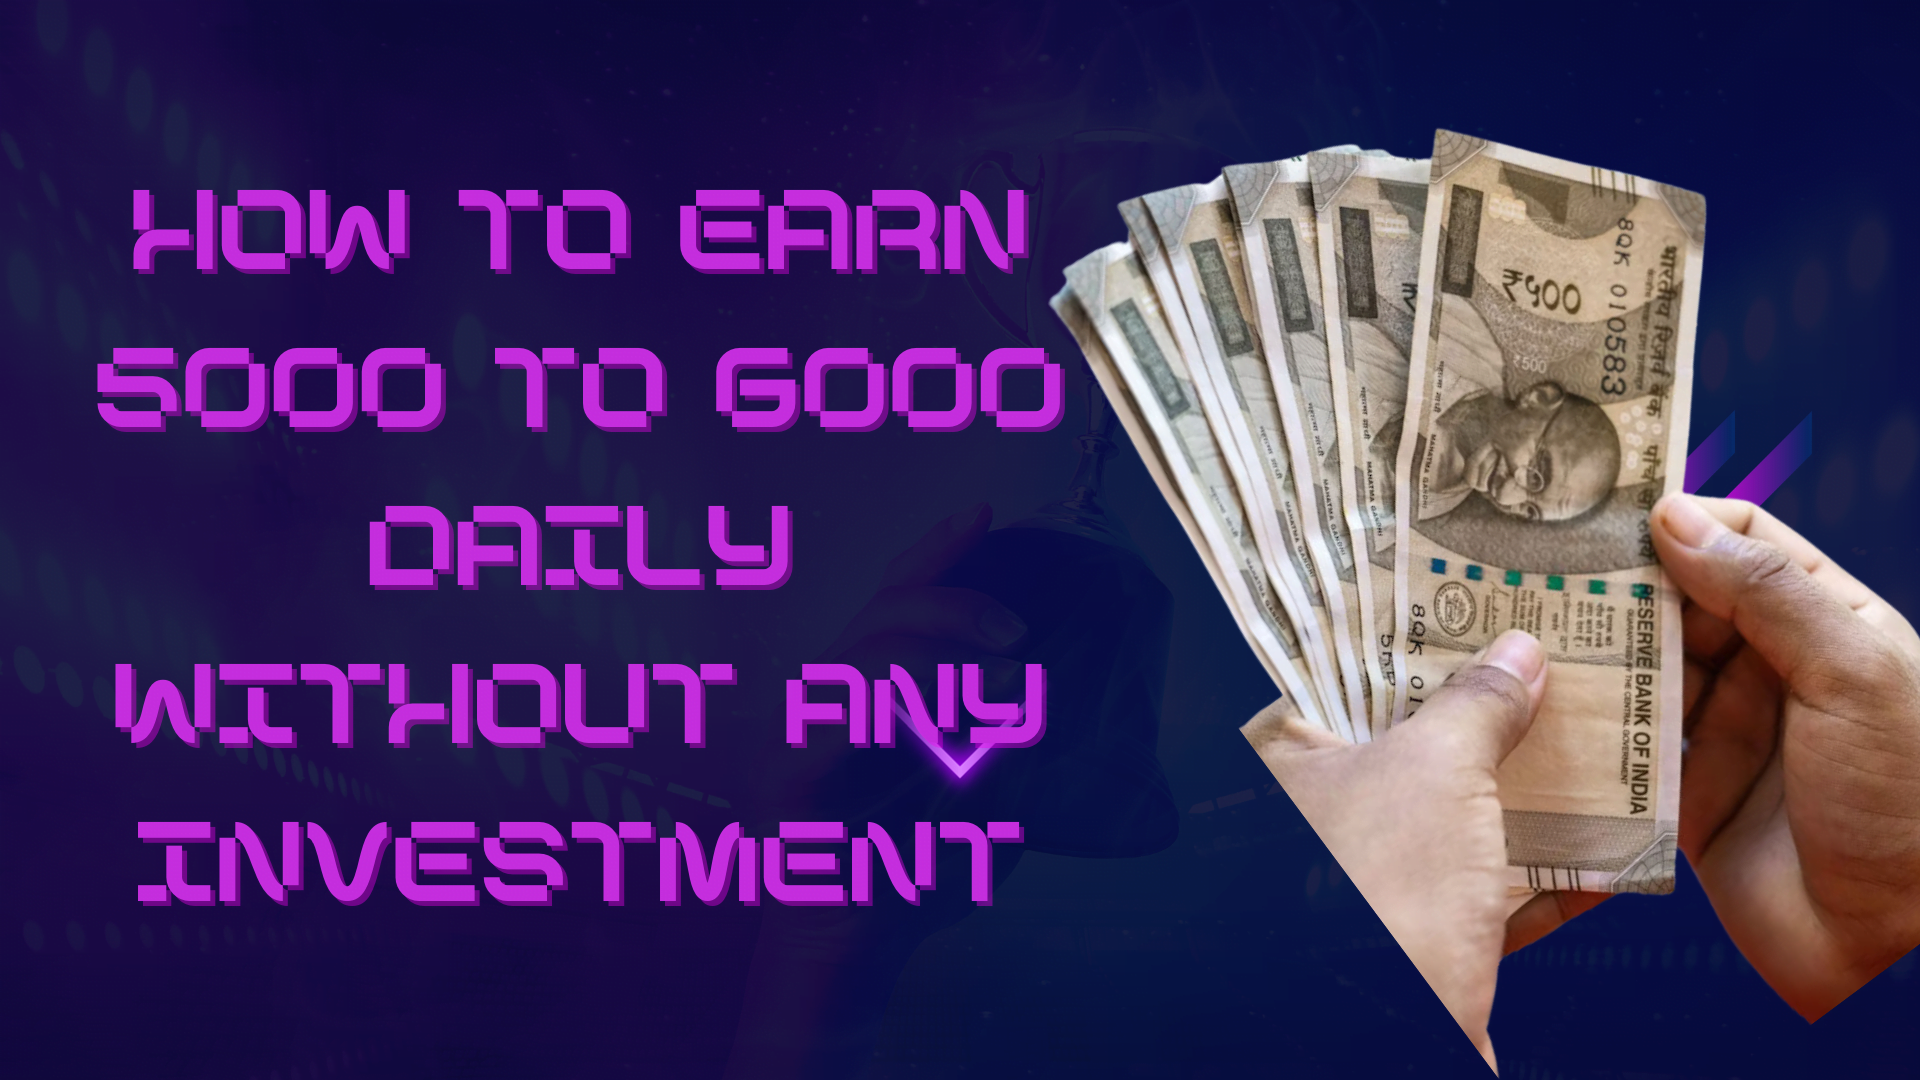 4 Way to Earn 5000 to 6000 Daily Without Any Investment